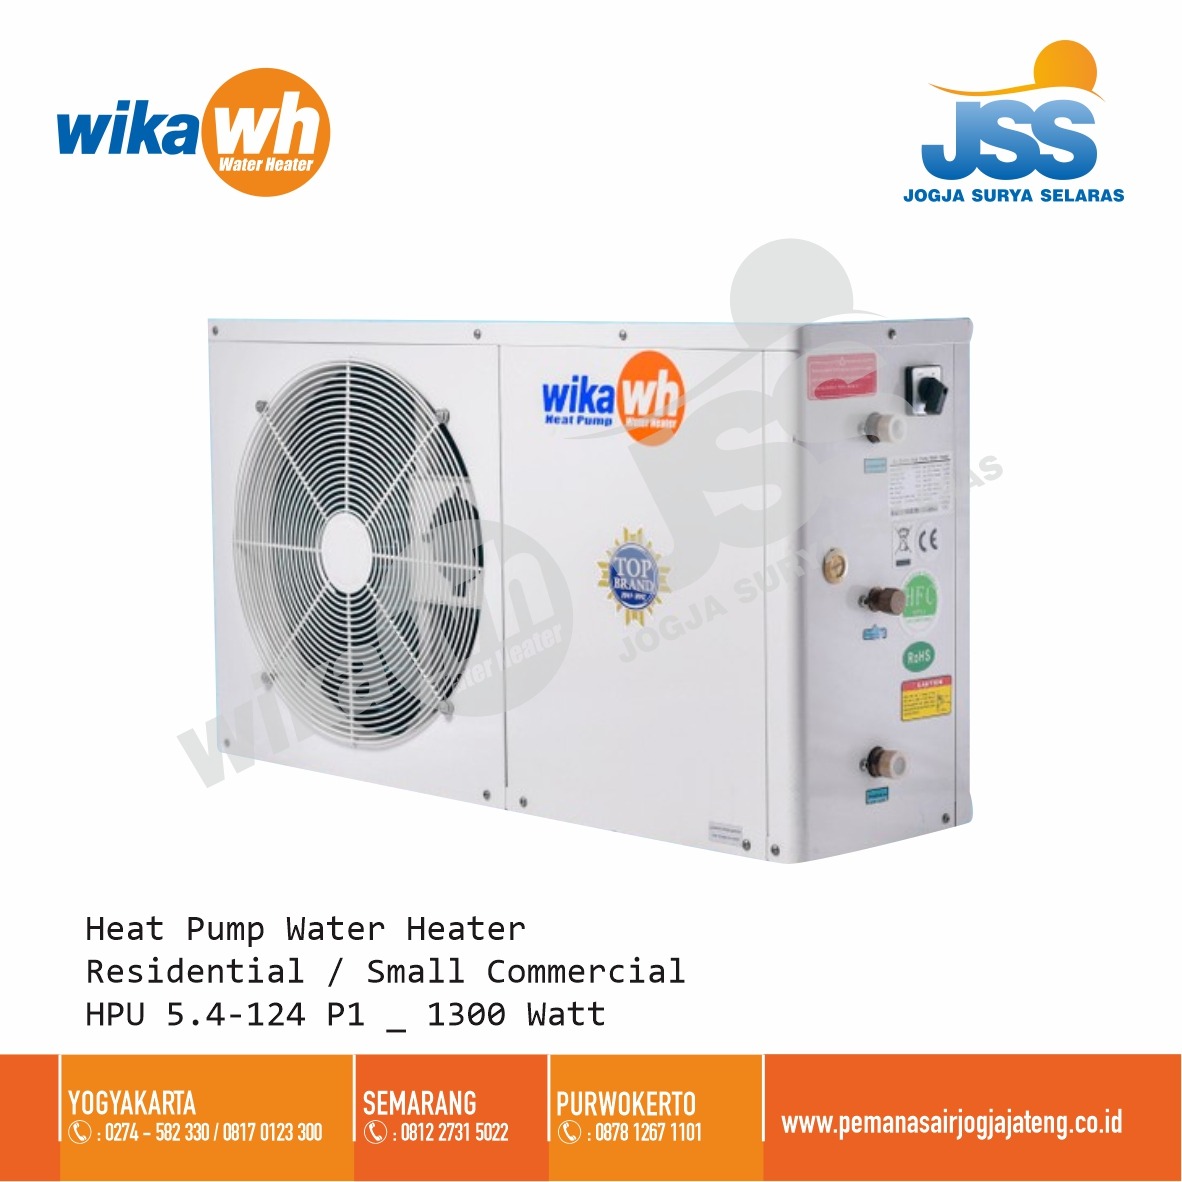 Wika Heat Pump Water Heater Residental/ Small Commercial (220 V/1 Phase)